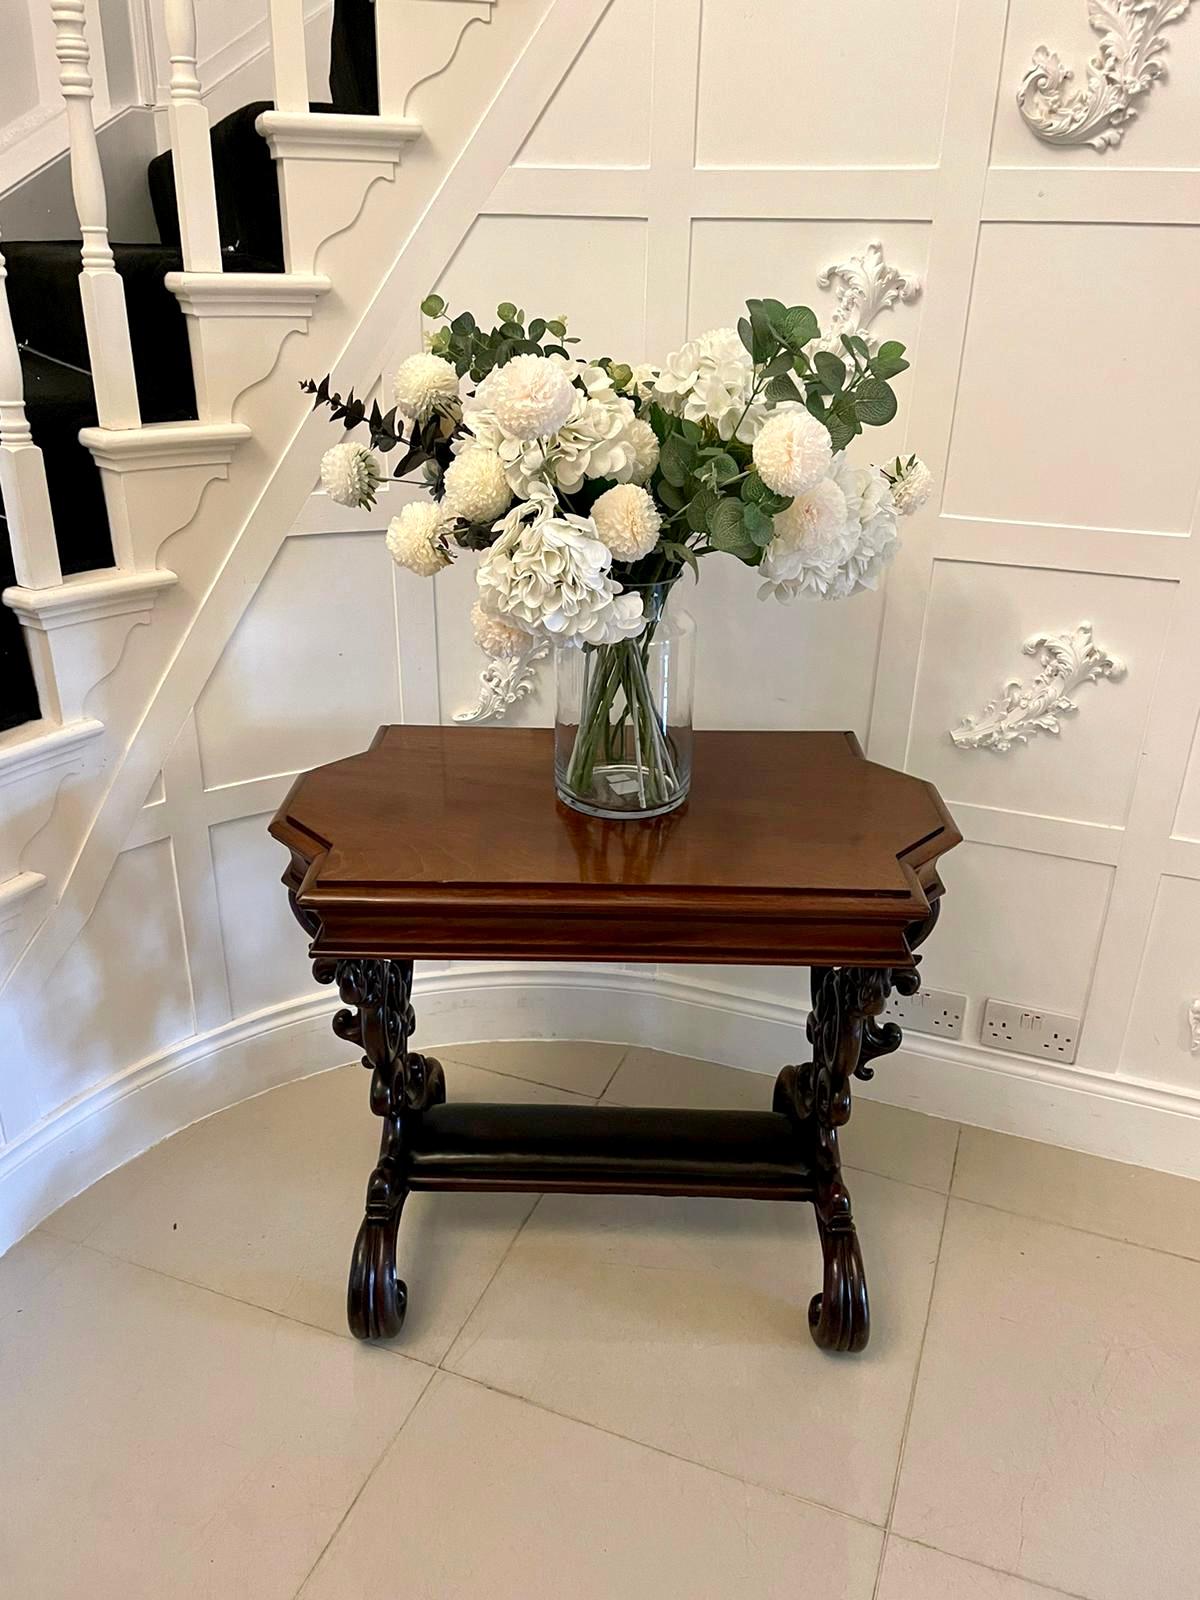 Outstanding quality 19th century antique carved mahogany freestanding centre/side table with an attractive shaped top with fitted drawer to the shaped frieze. It has fabulous elaborately carved scroll supports and stands on elegant carved scroll